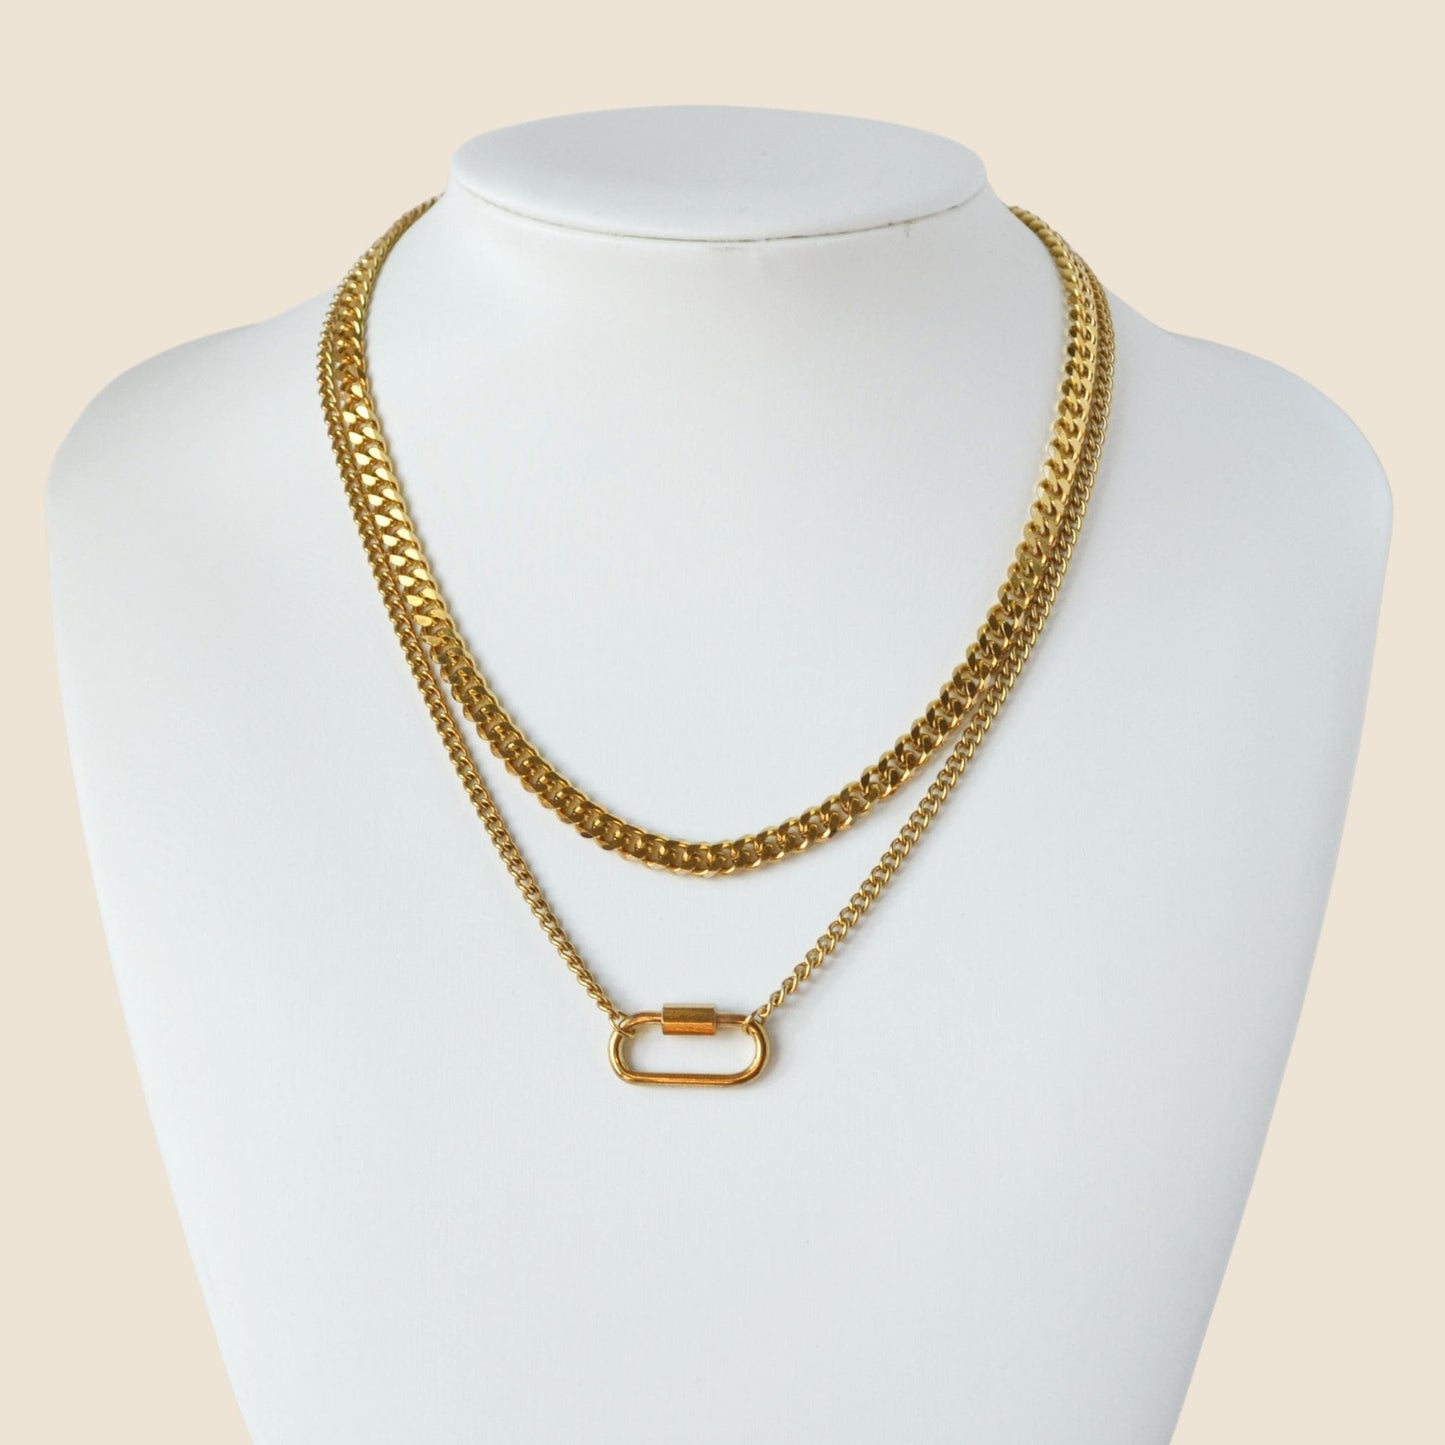 Chunly Gold Necklace Set For Women or Men - 5mm Cuban Curb Chain and Carabiner Pendant Necklace - Necklace - Boutique Wear RENN